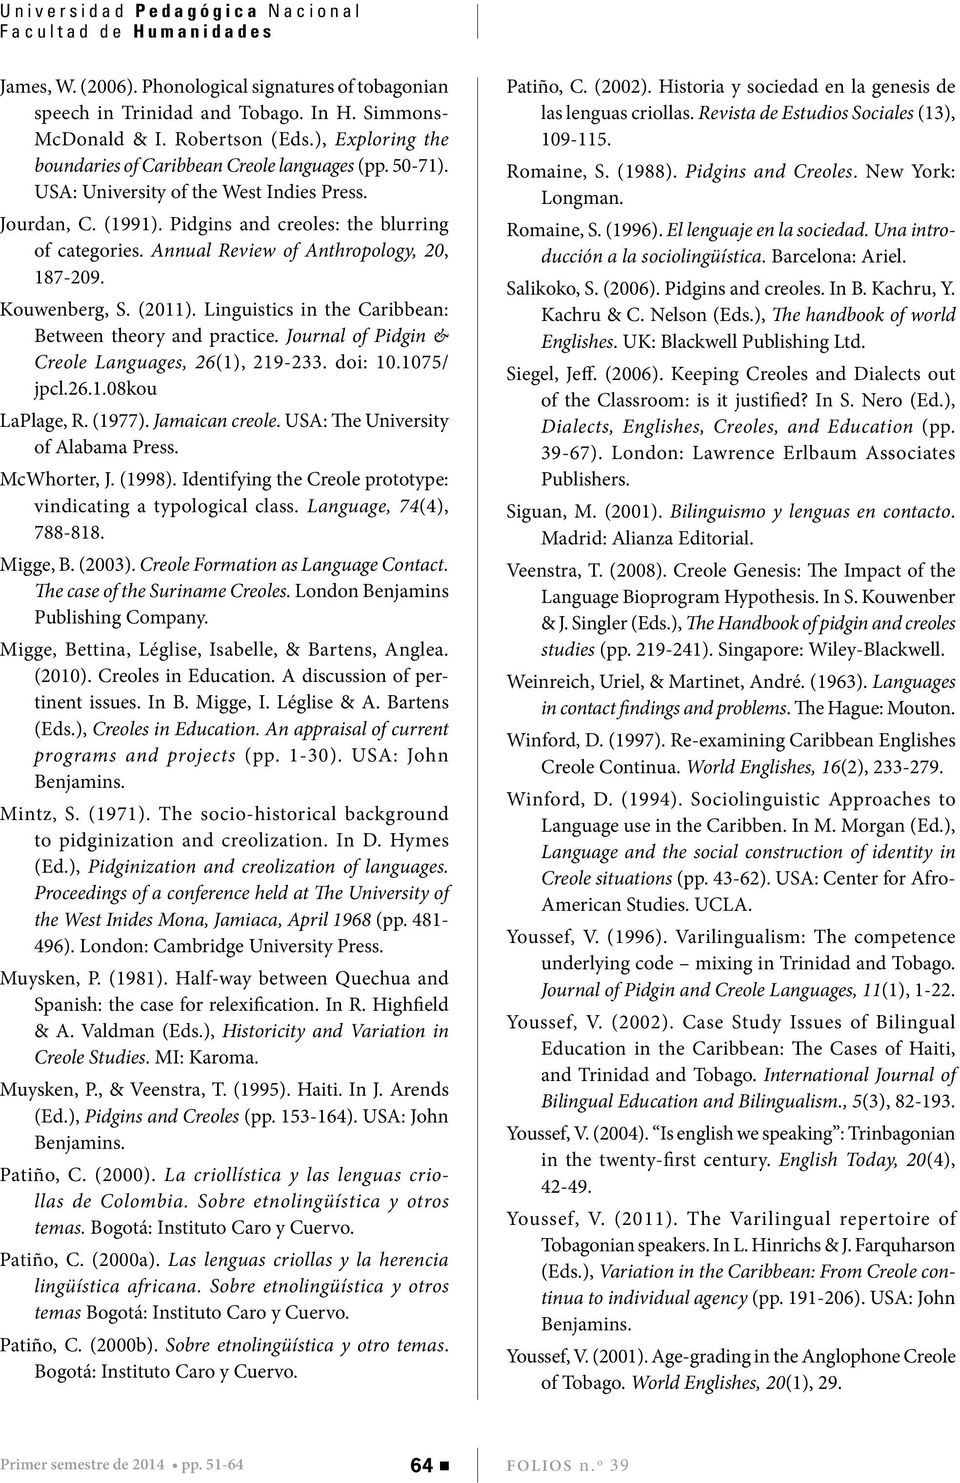 Annual Review of Anthropology, 20, 187-209. Kouwenberg, S. (2011). Linguistics in the Caribbean: Between theory and practice. Journal of Pidgin & Creole Languages, 26(1), 219-233. doi: 10.1075/ jpcl.